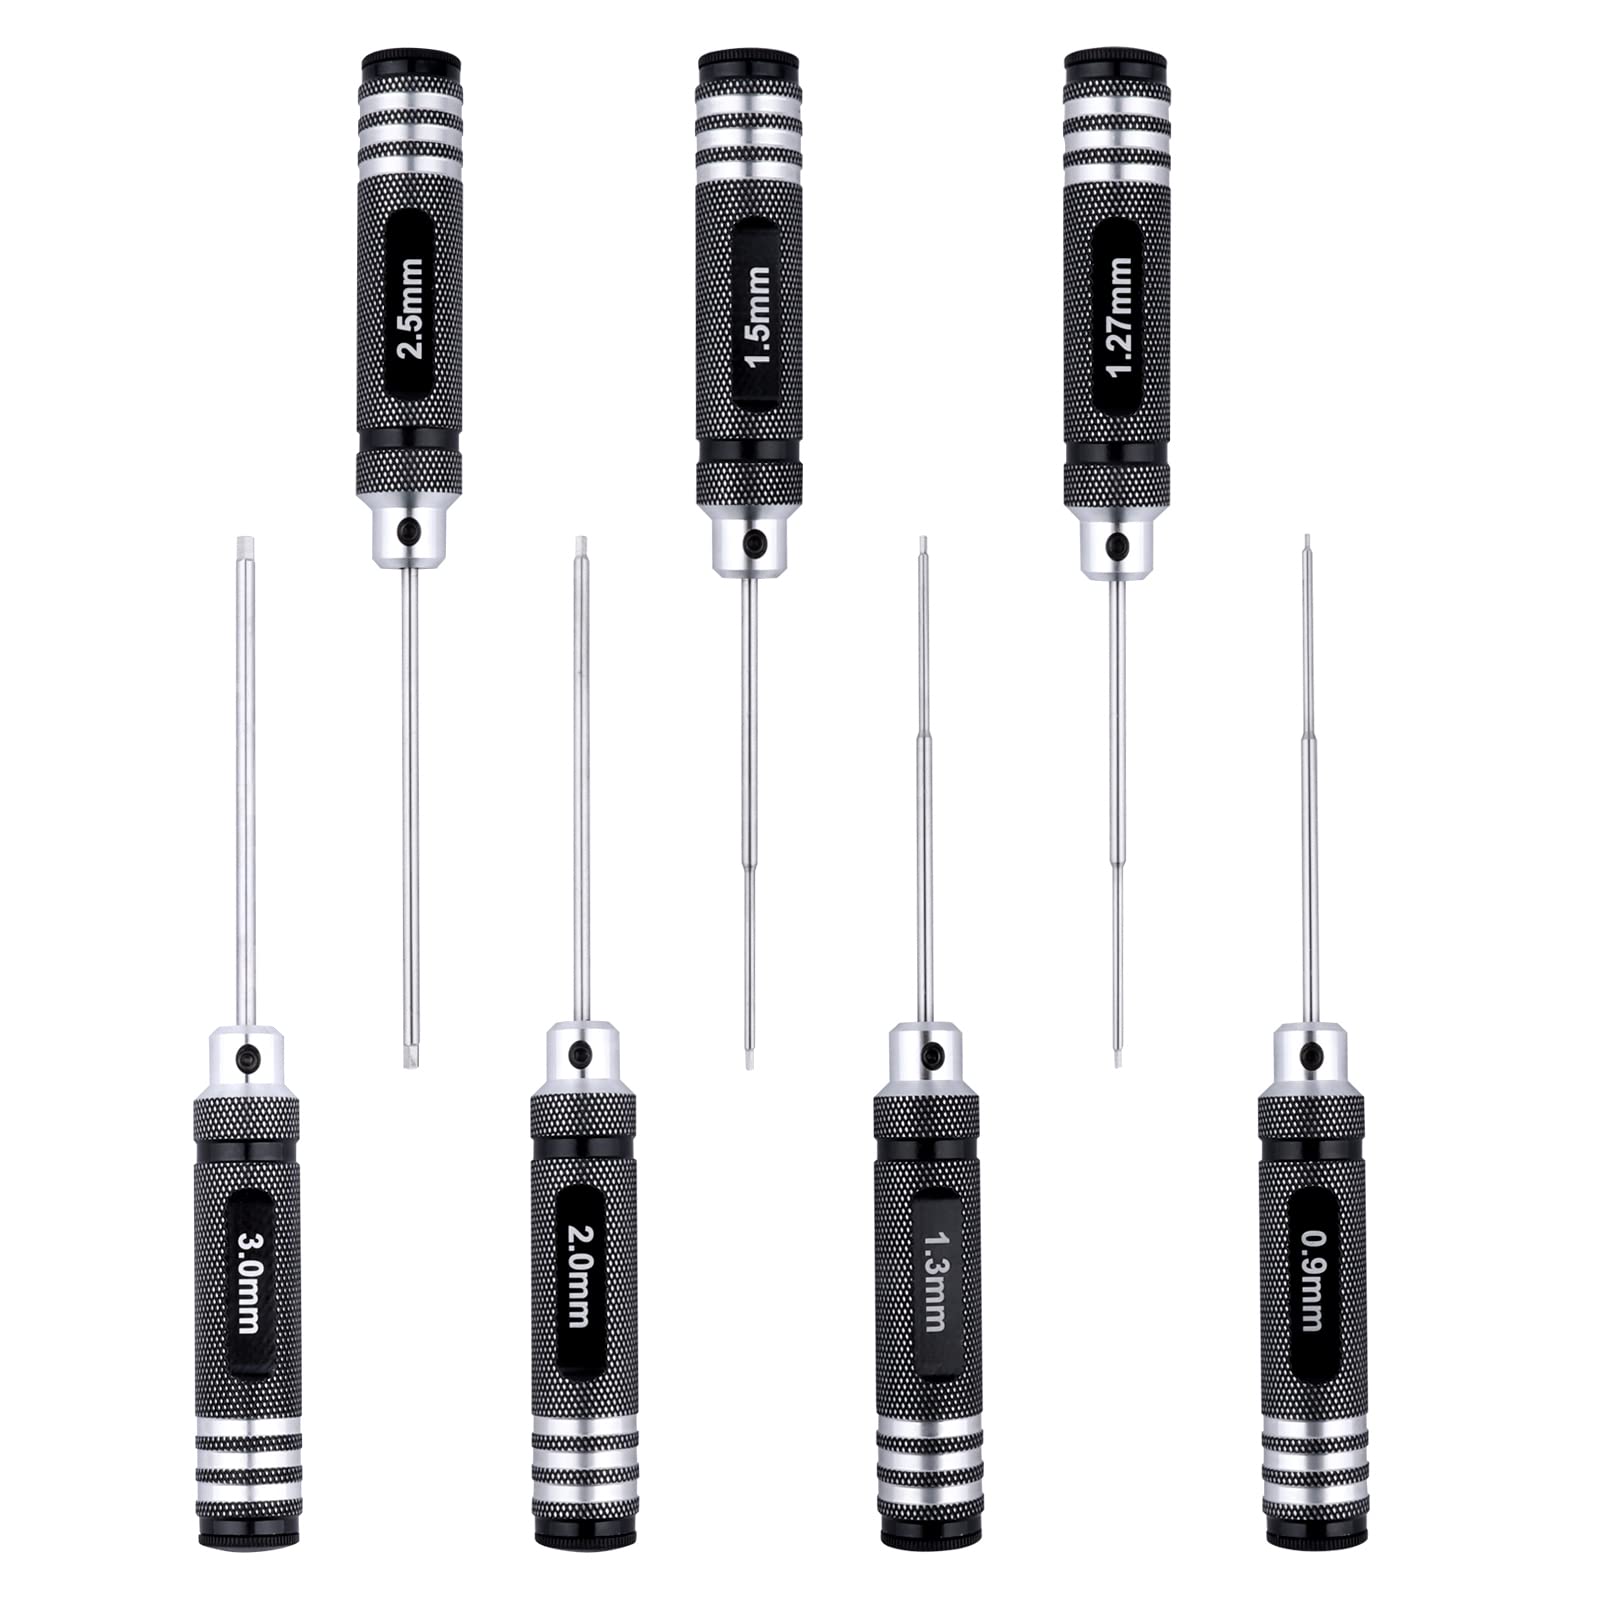 Hex Screwdriver Set - 7pcs Hex Allen Drive Kit 0.9mm 1.27mm 1.3mm 1.5mm 2.0mm 2.5mm 3.0mm Key Repair Tools for Traxxas Arrma Losi Redcat RC Cars Models FPV Drone Helicopter